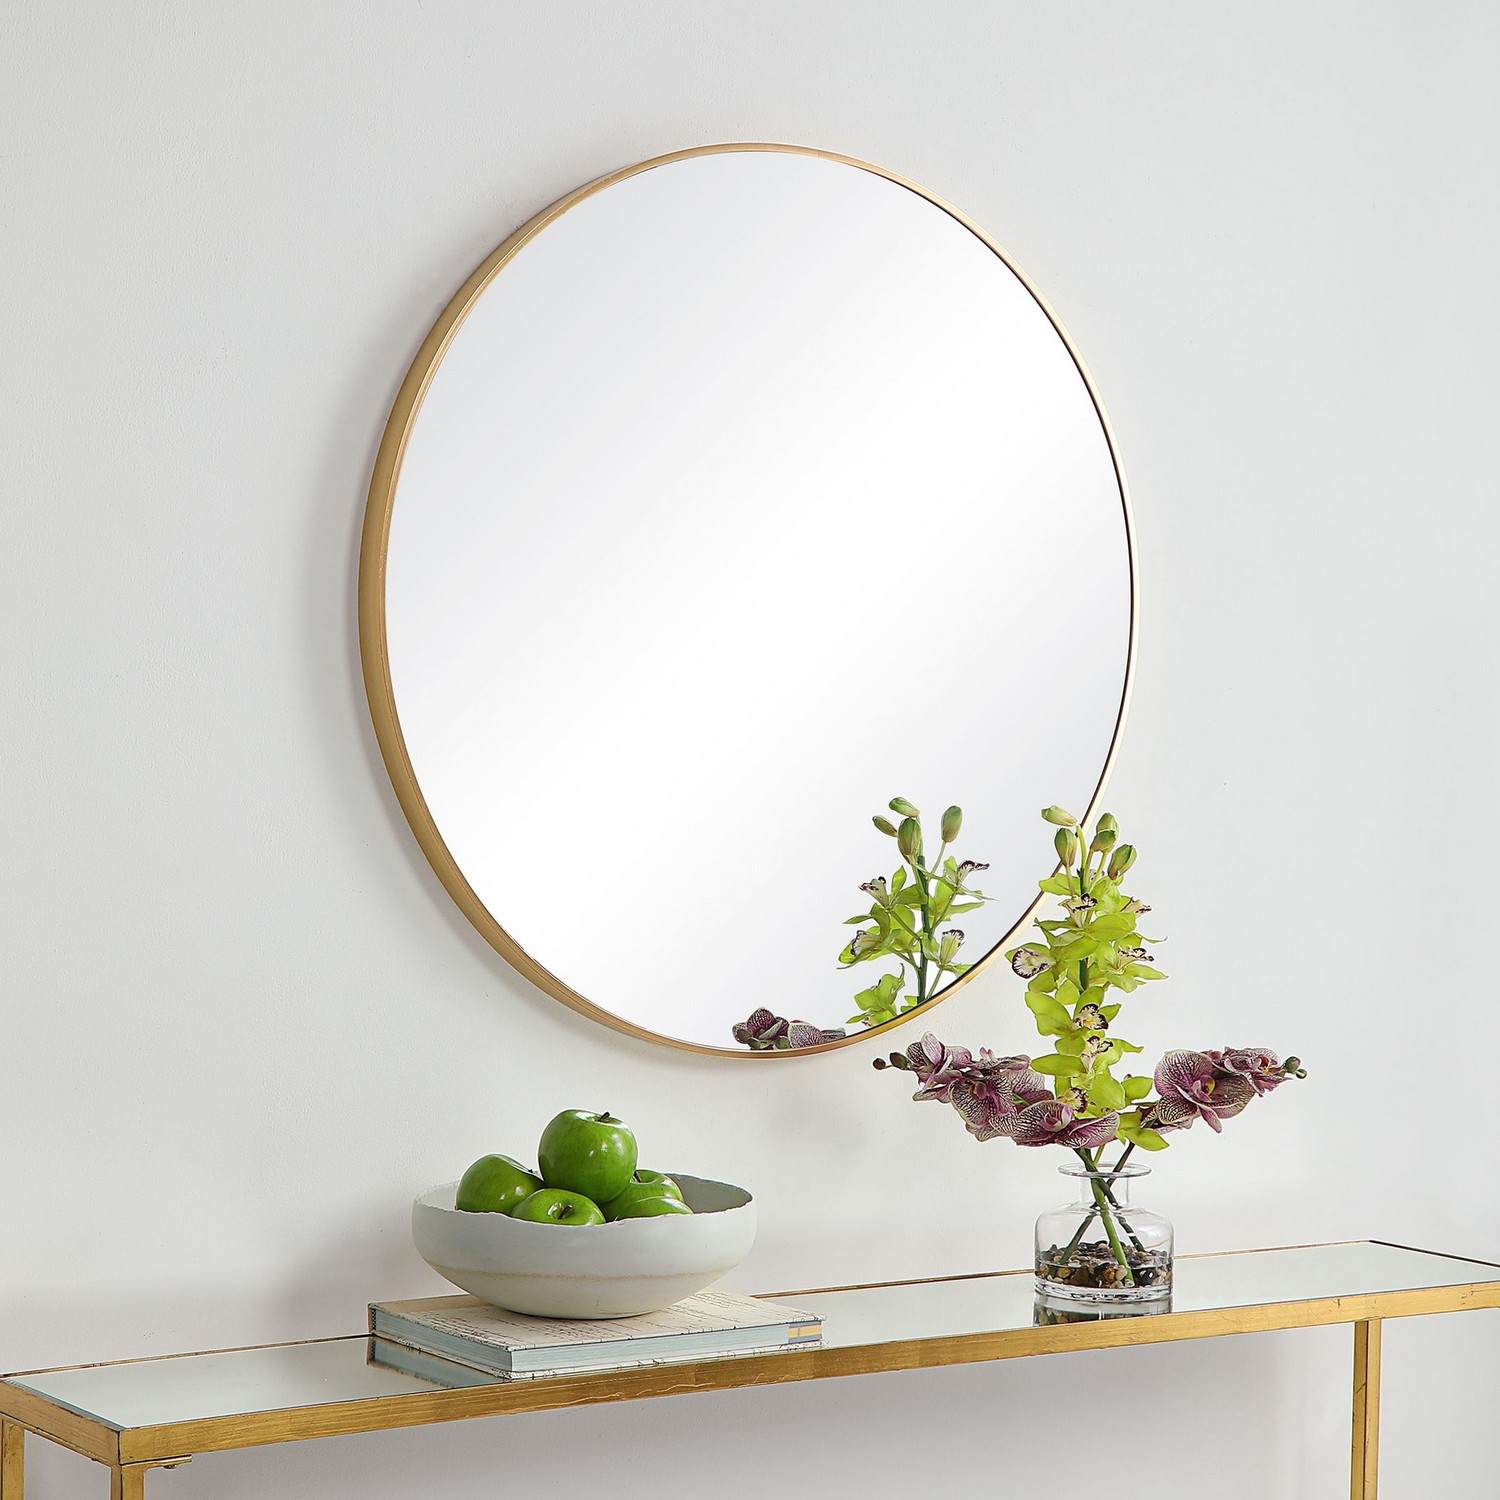 Uttermost W00511 Mirror - Brushed Gold